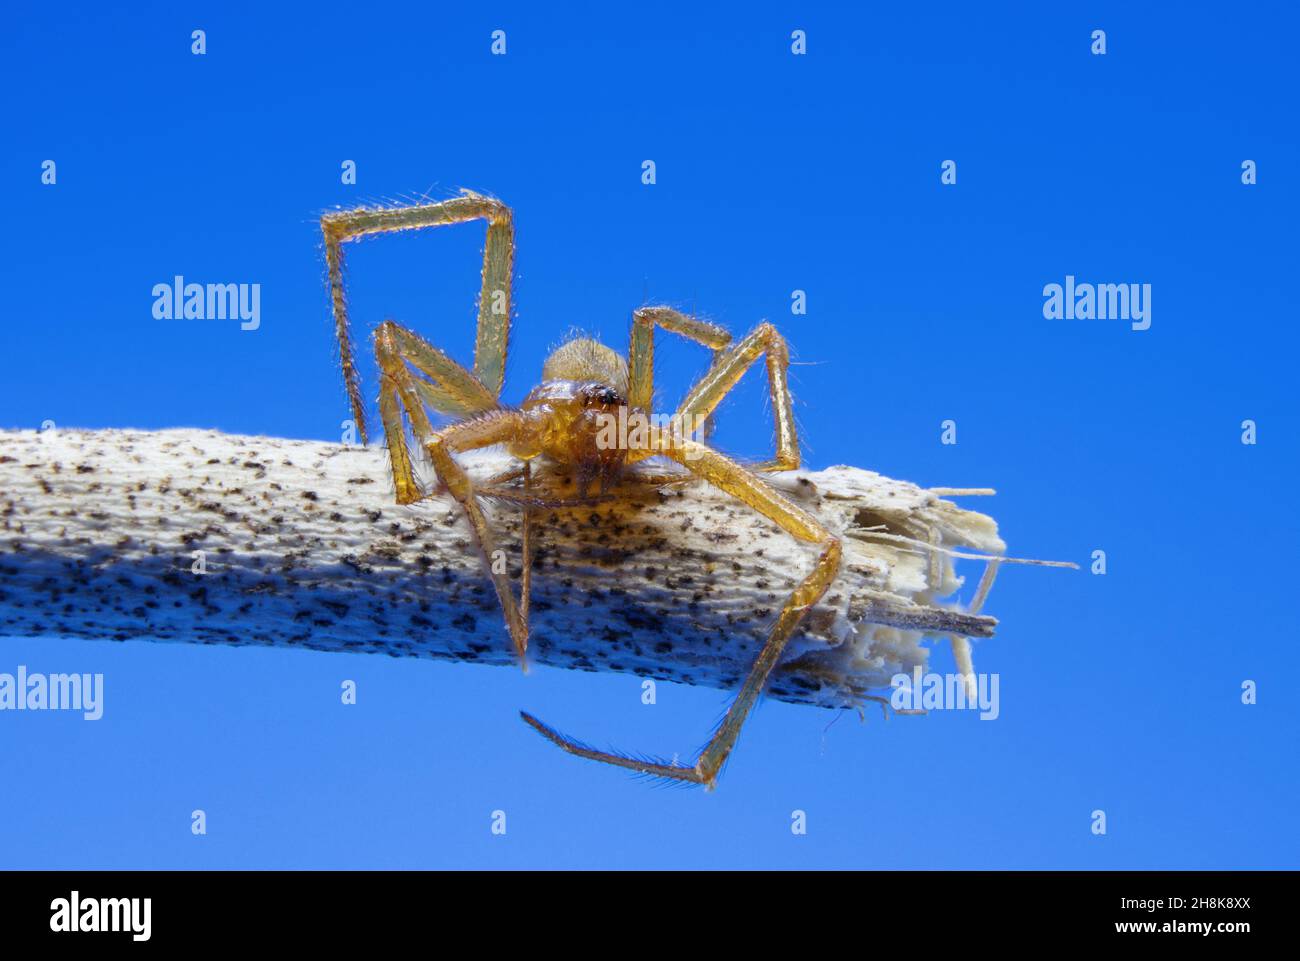 Spider on the wood isolated on a blue background Stock Photo